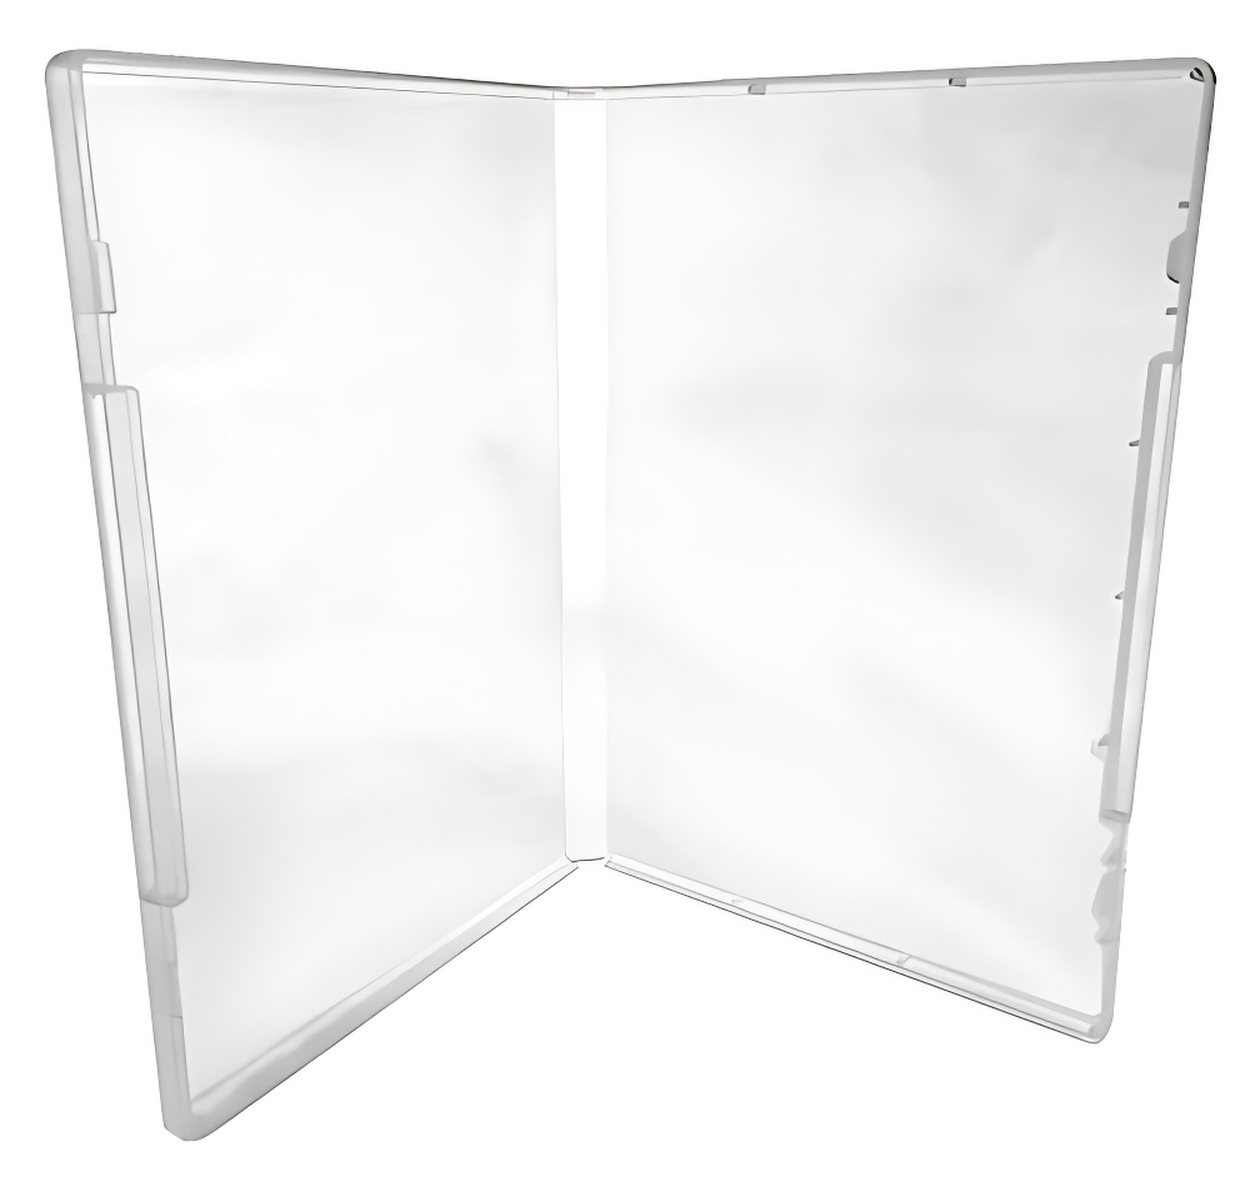 CheckOutStore CLRCASERSNC1000 1,000 Clear Storage Cases 14mm for